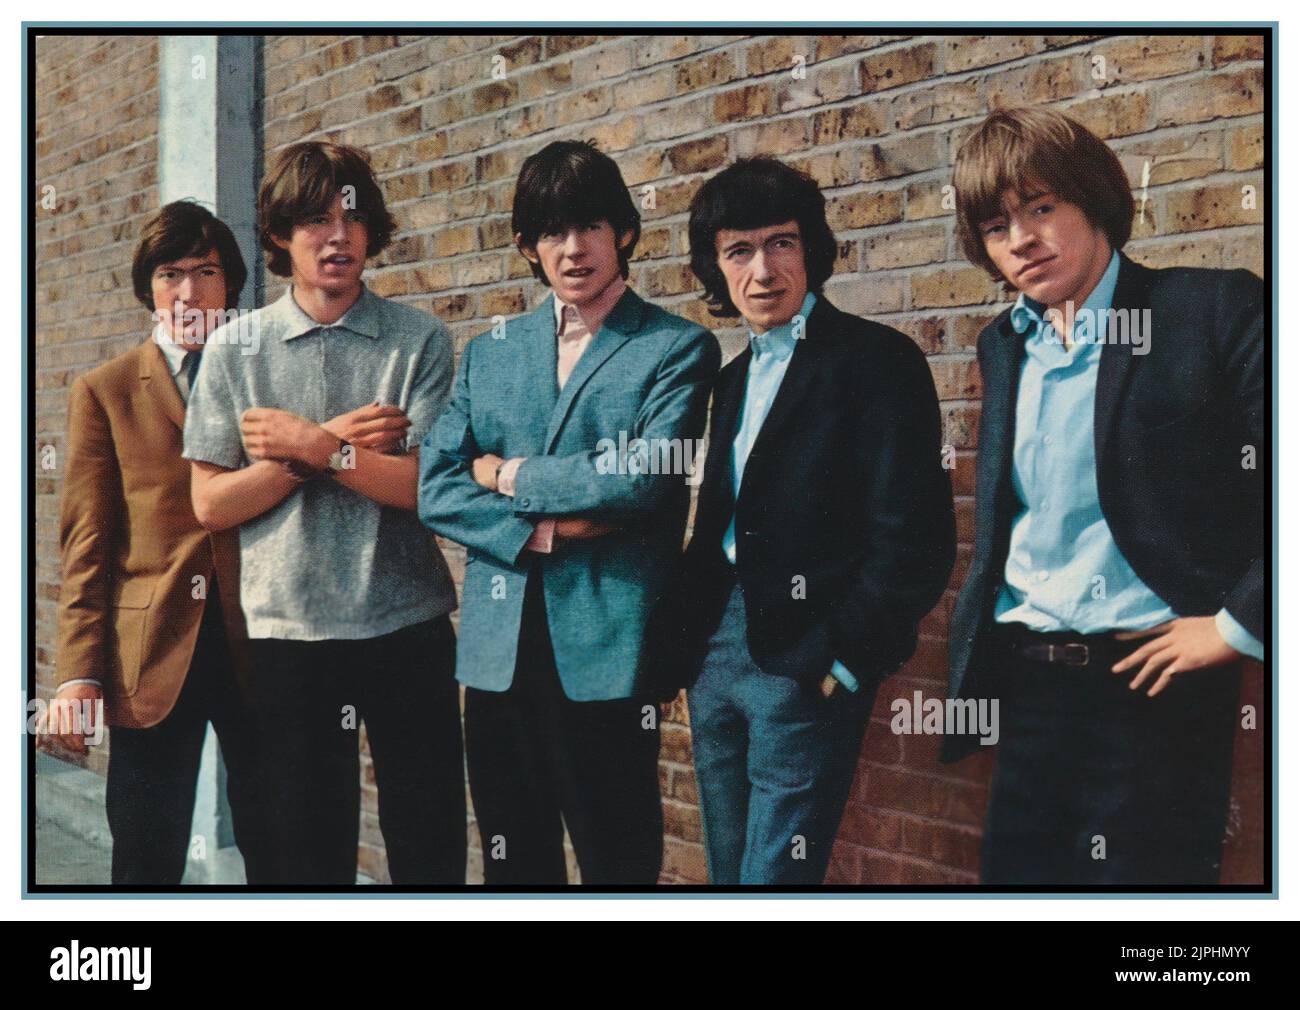 Vintage early 1958 Rolling Stones Promotional Promo Poster Card with L-R Charlie Watts, Mick Jagger, Keith Richards, Bill Wyman and Brian Jones. Pop music group in the UK that became one of the greatest British Pop groups of all time. Stock Photo